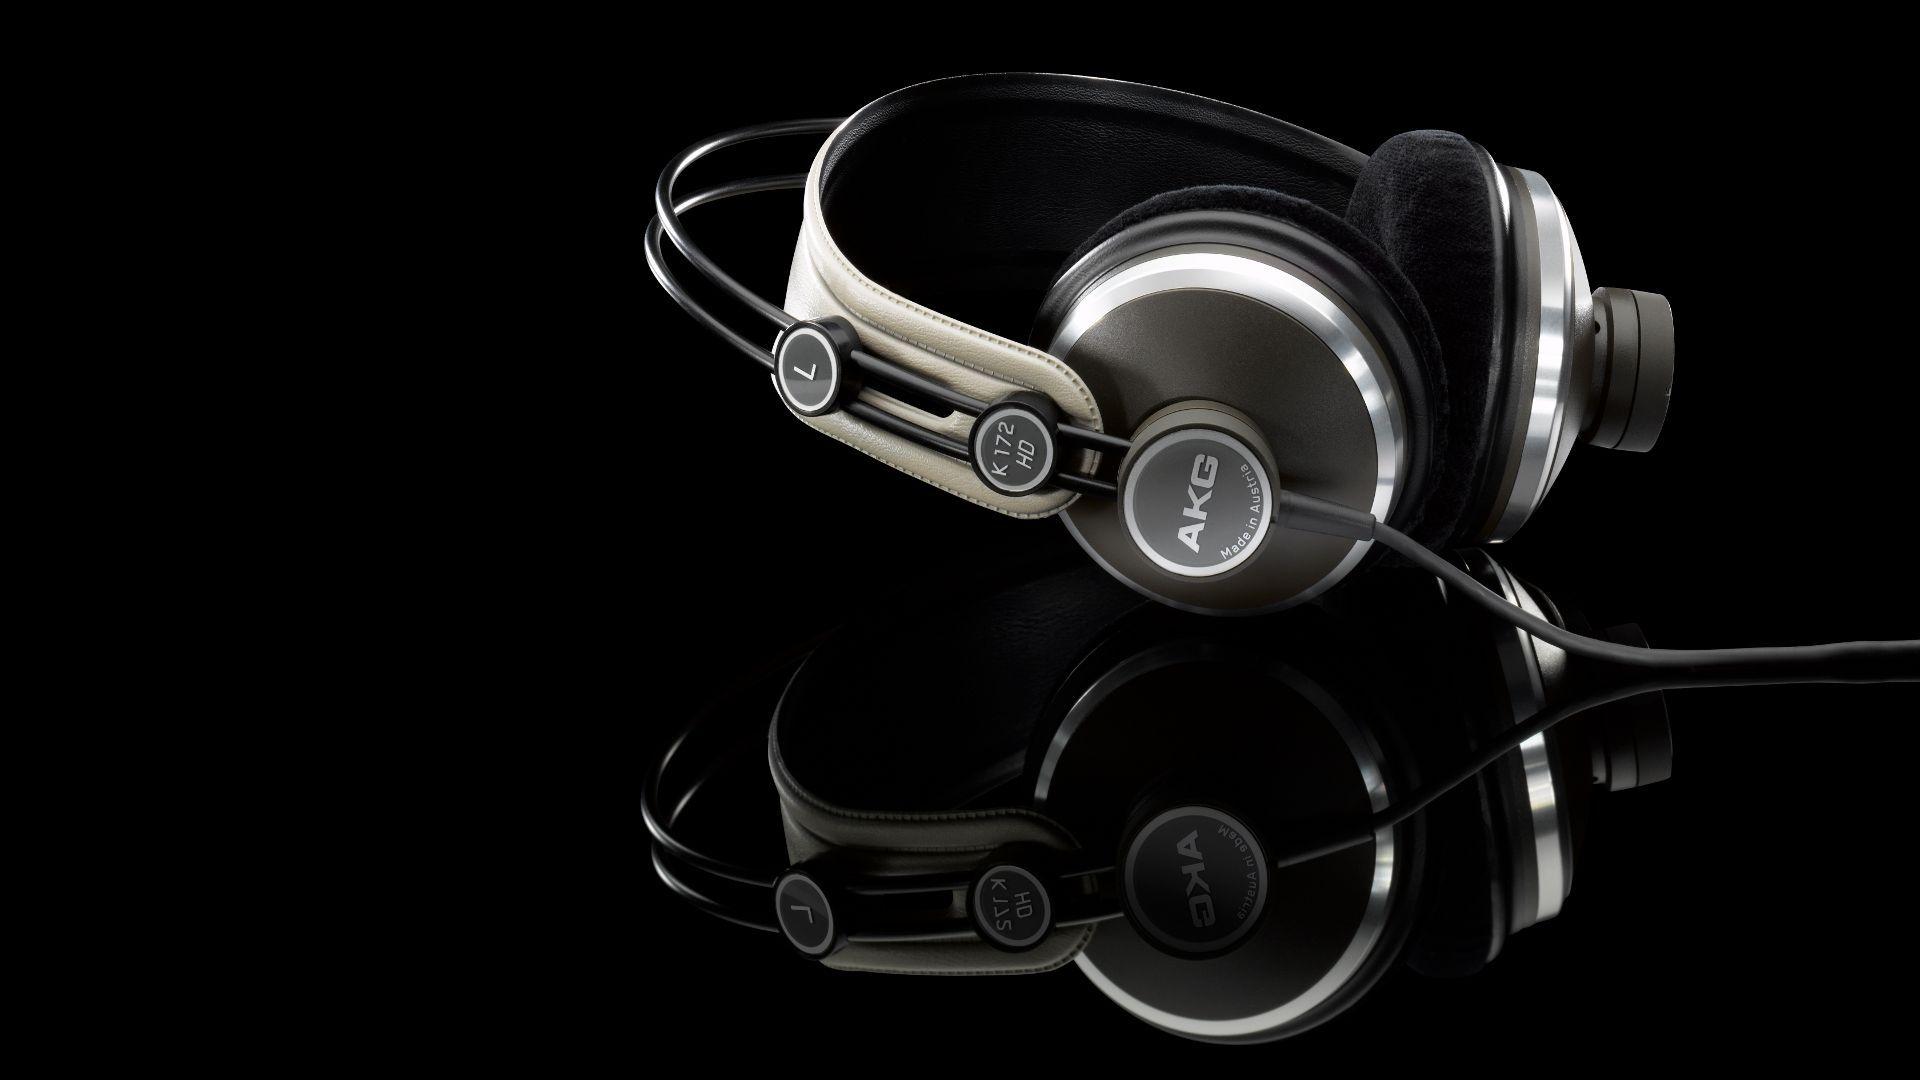 Headphone HD Monkeycom Wallpaper On Picture Image